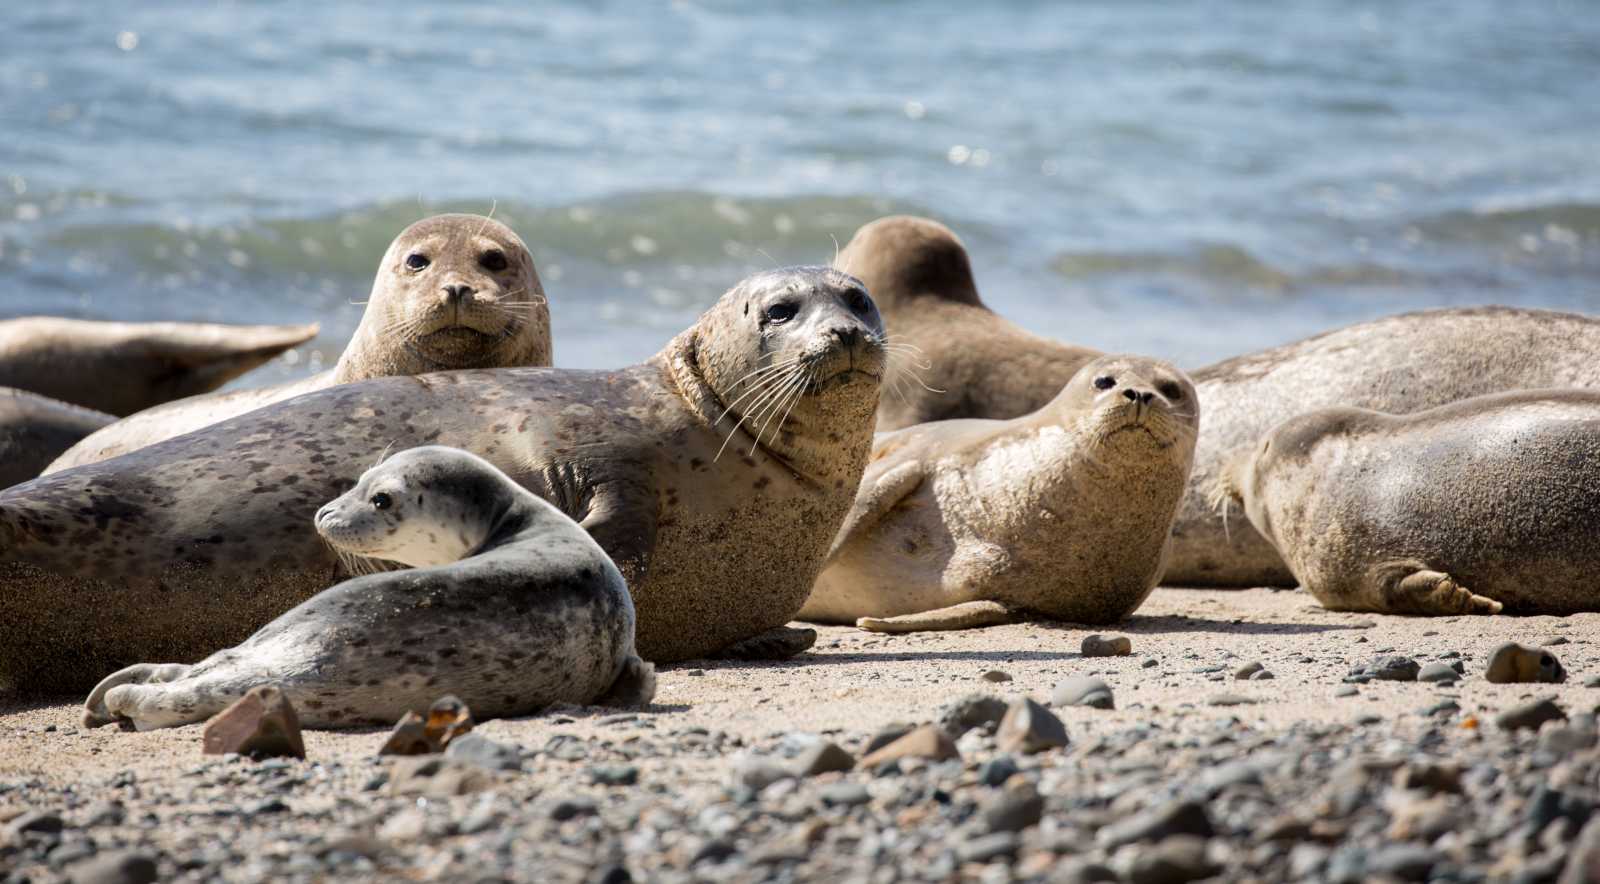 🐻 Can You Identify These US States Based on Their Official Animals? Harbor Seal